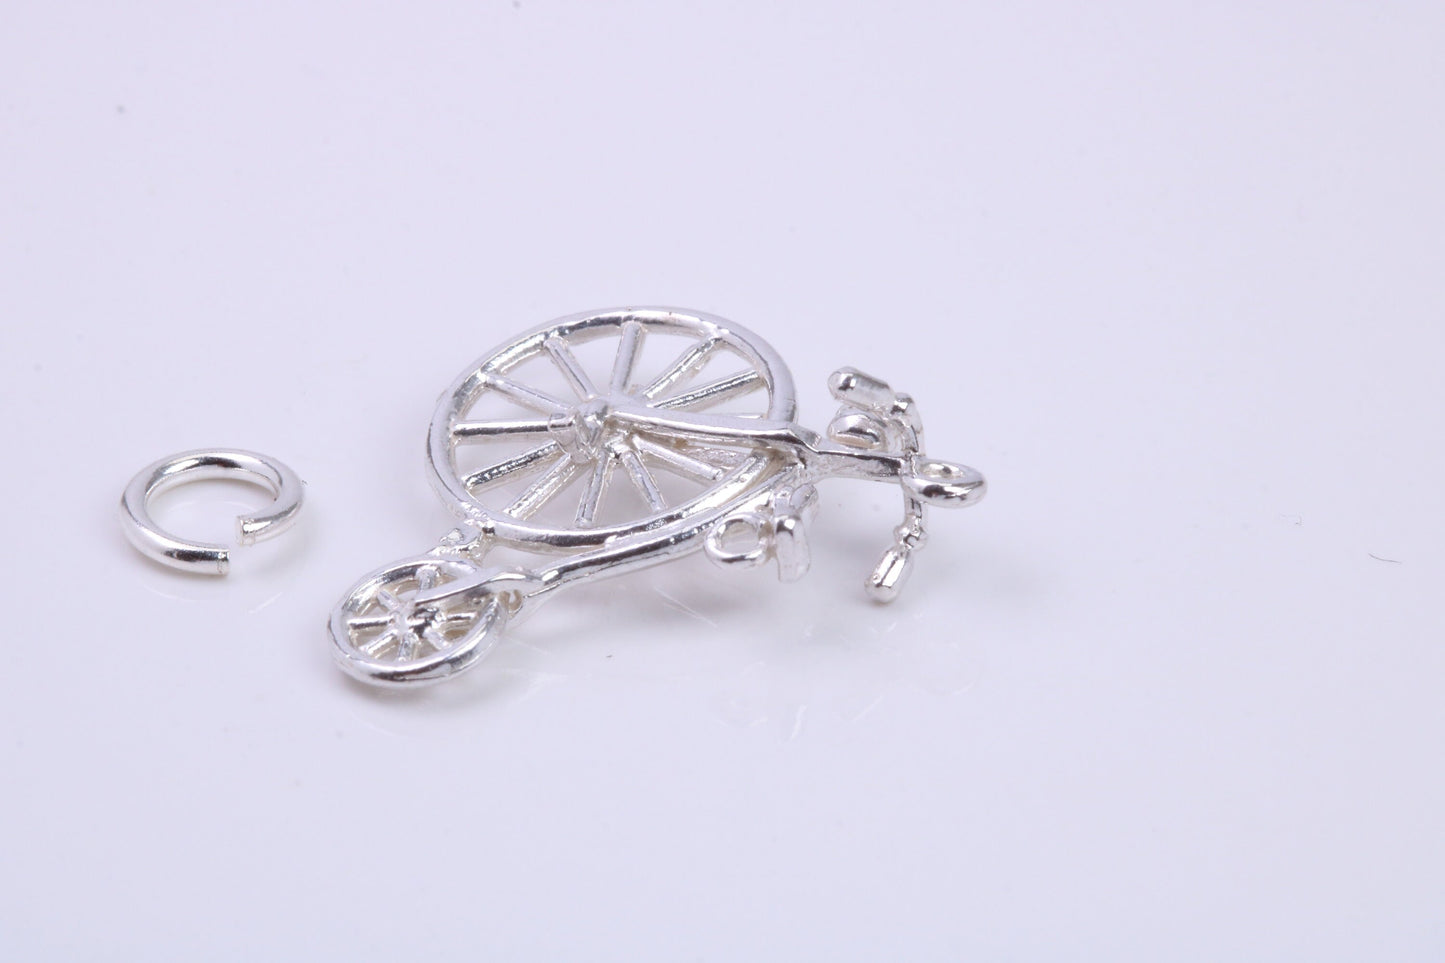 Penny Farthing Charm, Traditional Charm, Made from Solid 925 Grade Sterling Silver, Complete with Attachment Link